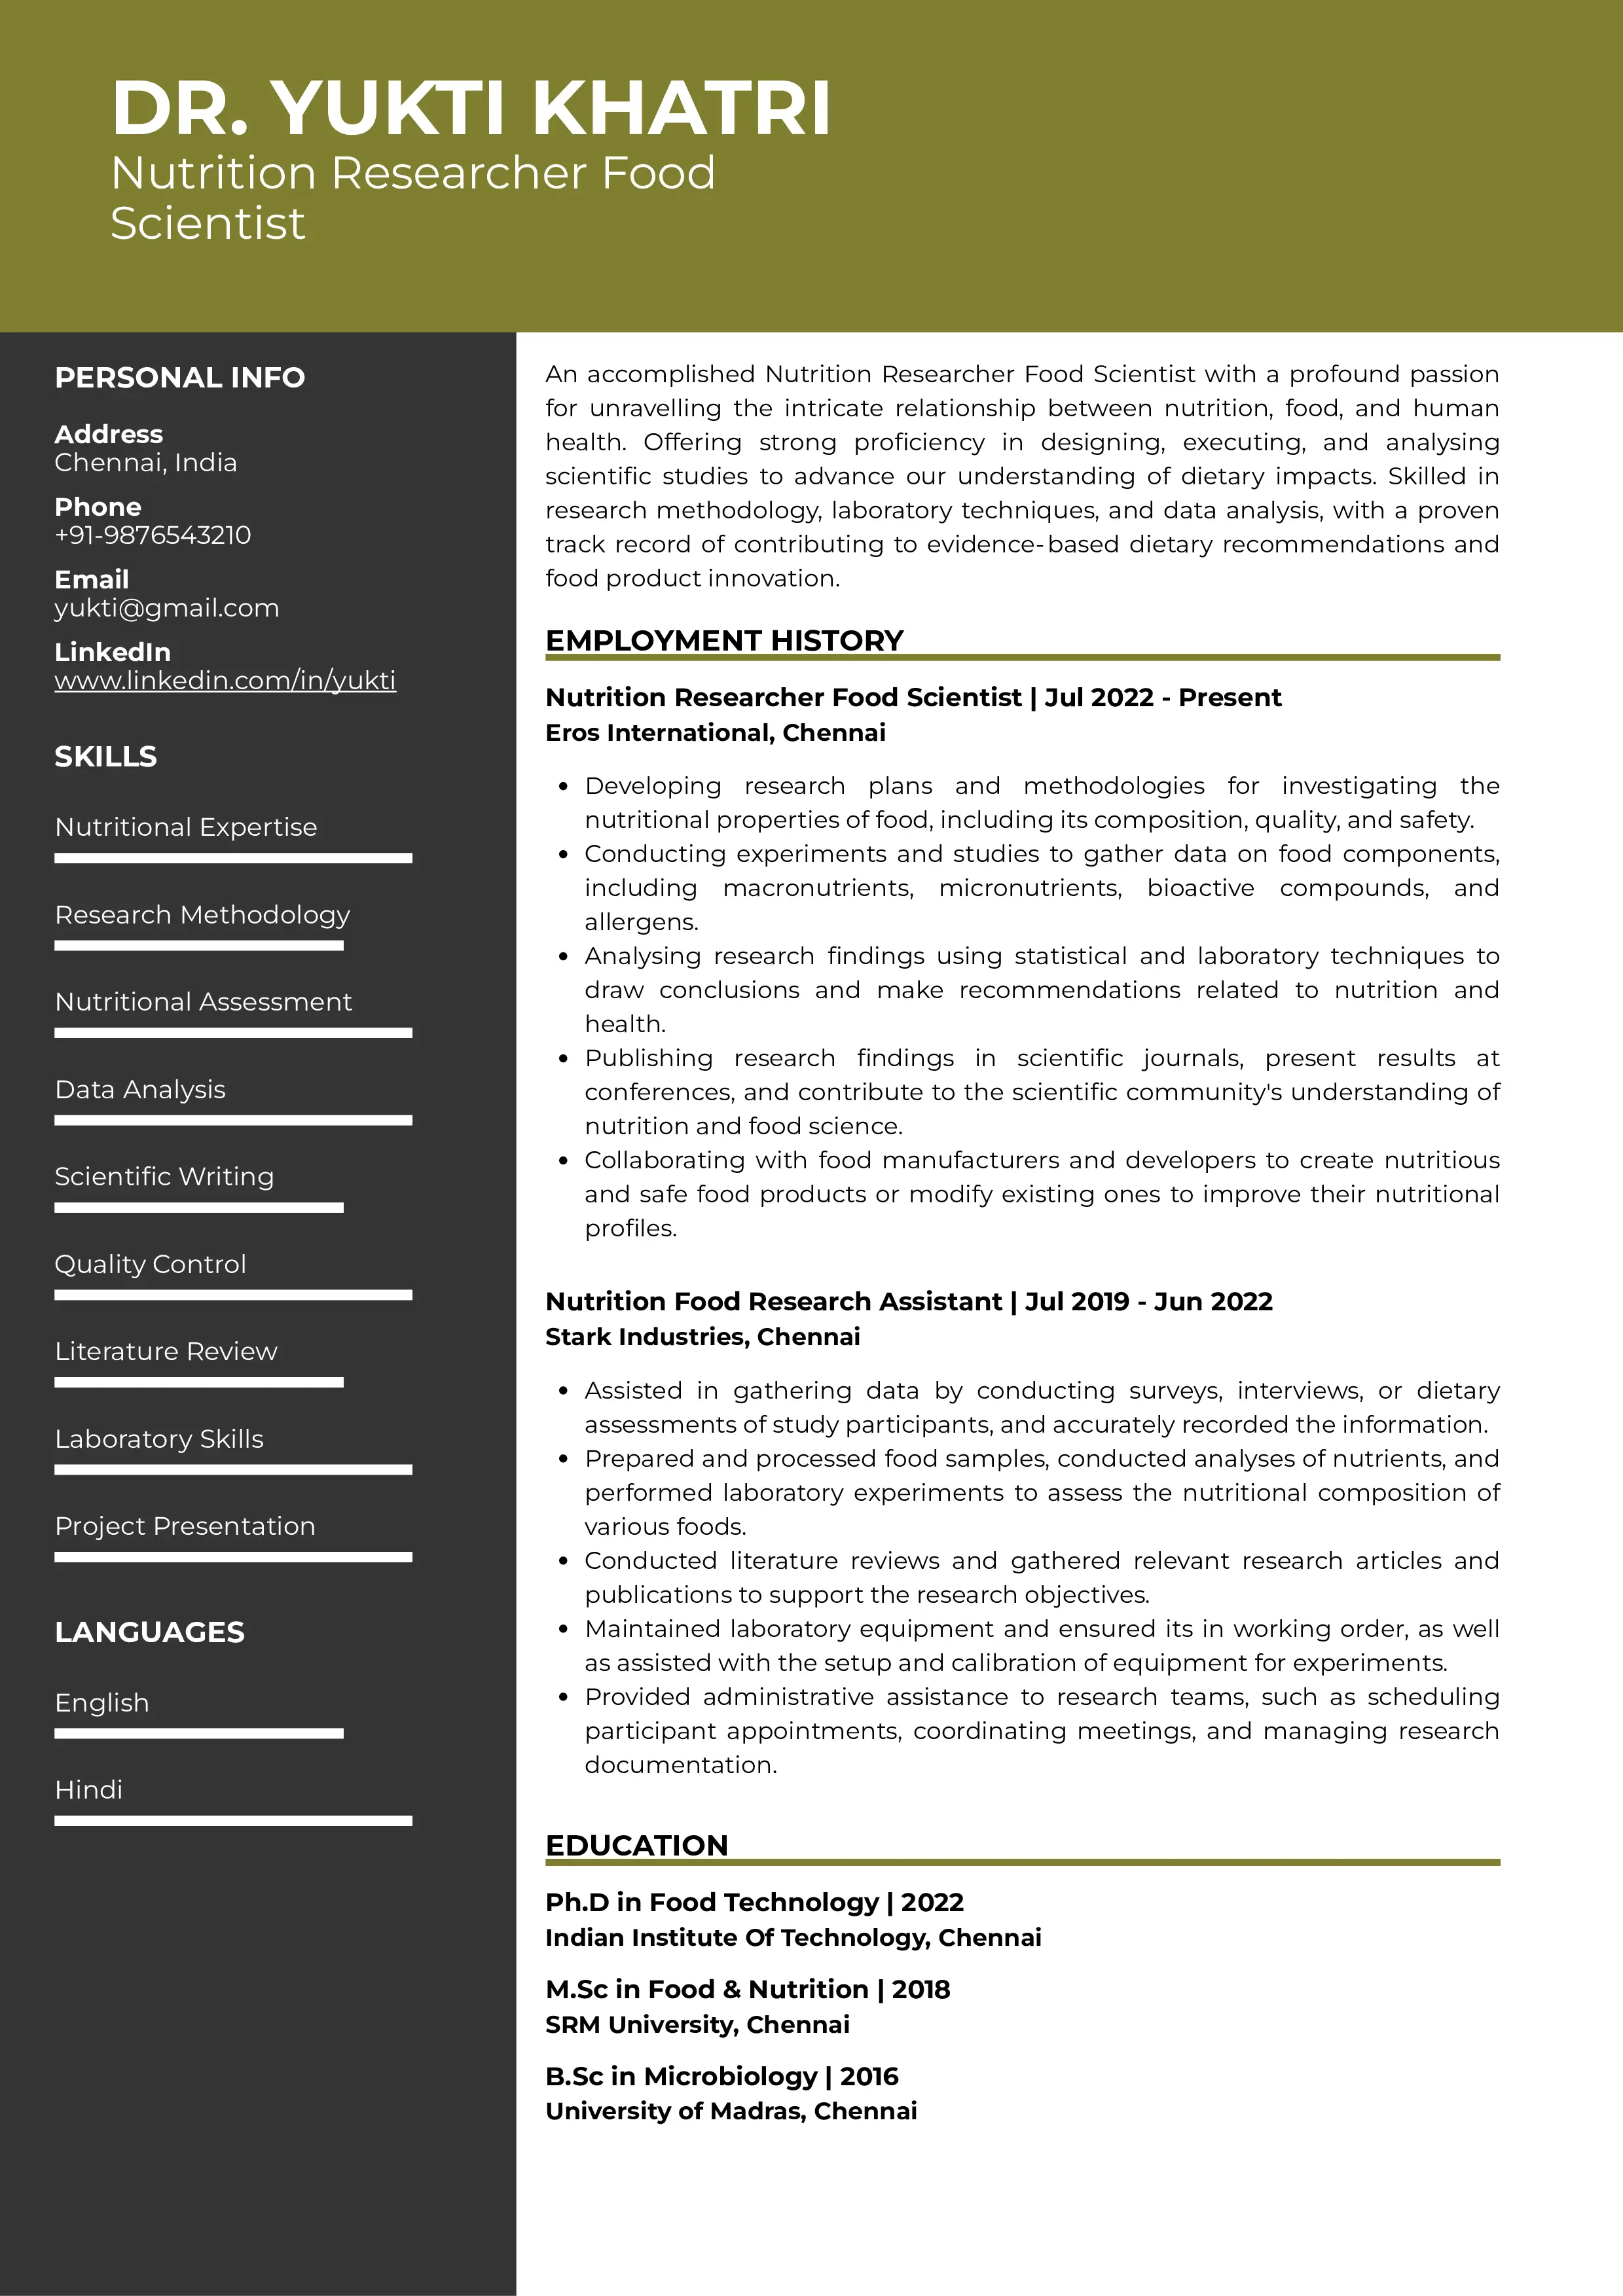 Sample Resume of Nutrition Researcher Food Scientist | Free Resume Templates & Samples on Resumod.co